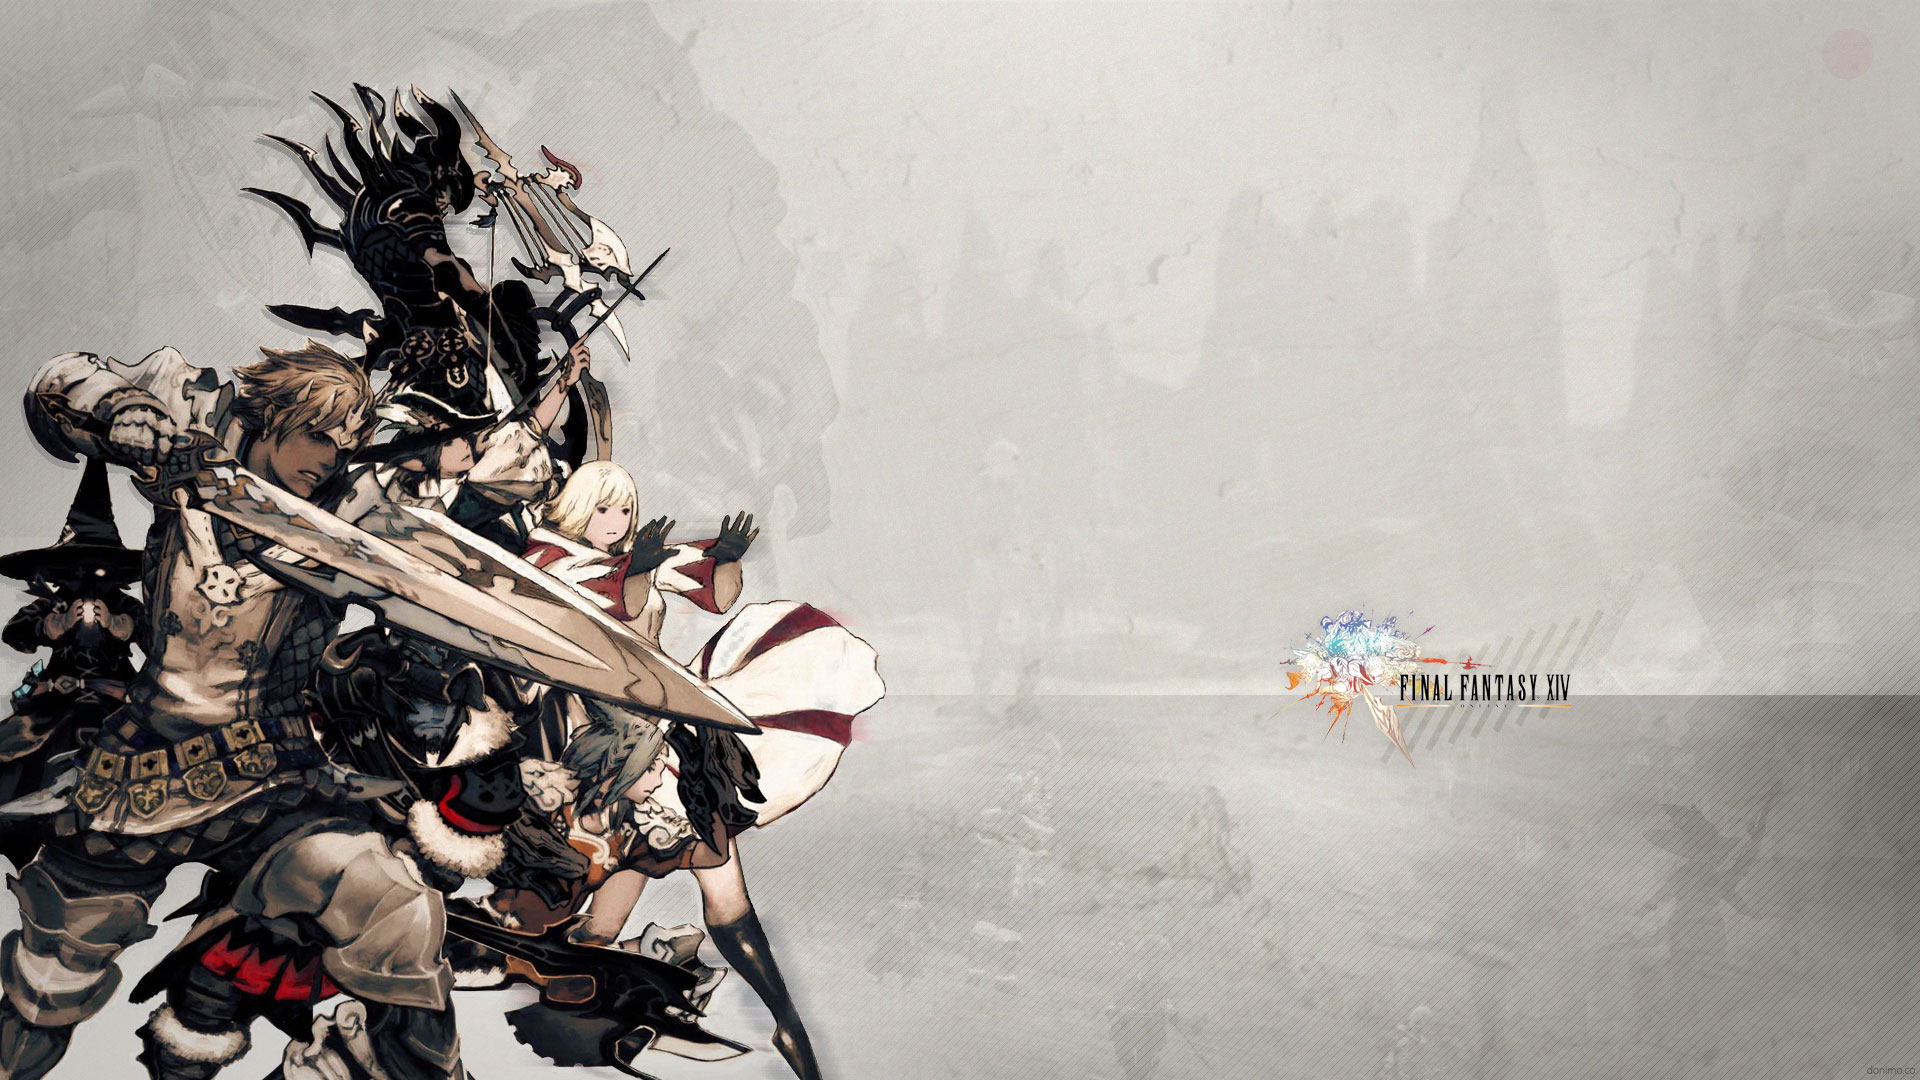 Free Download 50 In Ffxiv For Patch 21 Final Fantasy Xiv Guidesnews Ffxiv 19x1080 For Your Desktop Mobile Tablet Explore 76 Ffxiv Wallpaper Final Fantasy Wallpapers